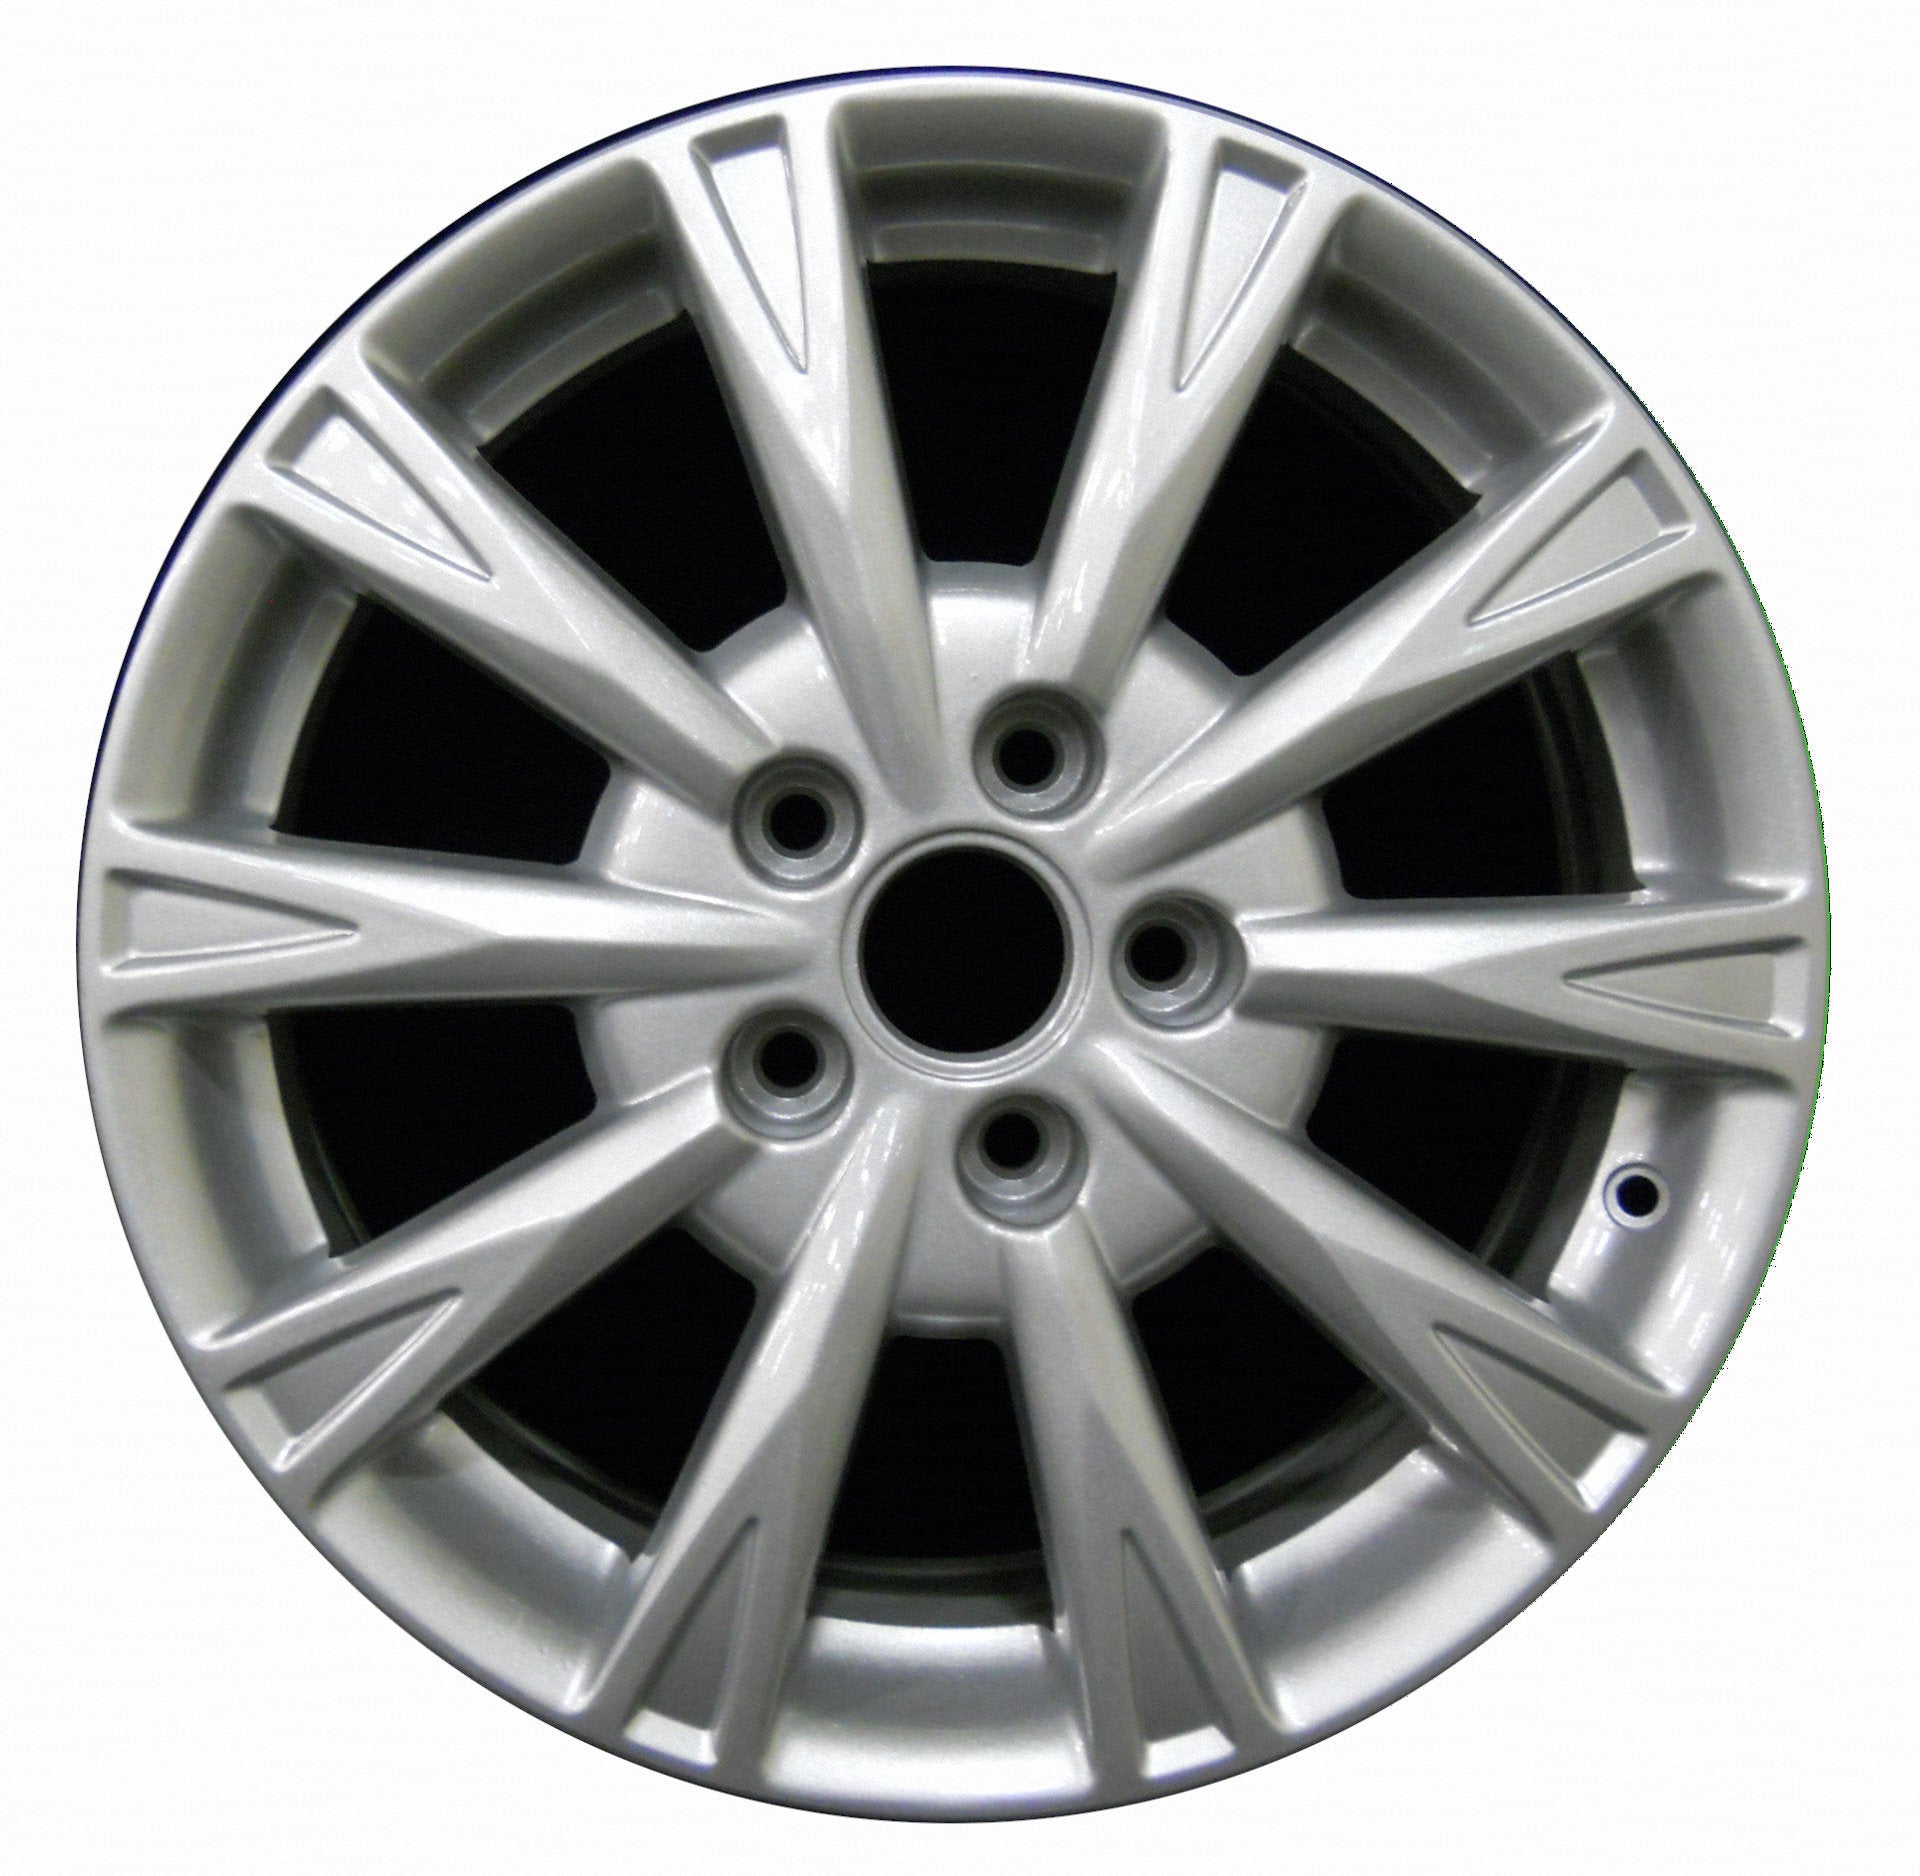 Buick Lucerne  2008, 2009, 2010, 2011 Factory OEM Car Wheel Size 17x7 Alloy WAO.4091.LS04.FF